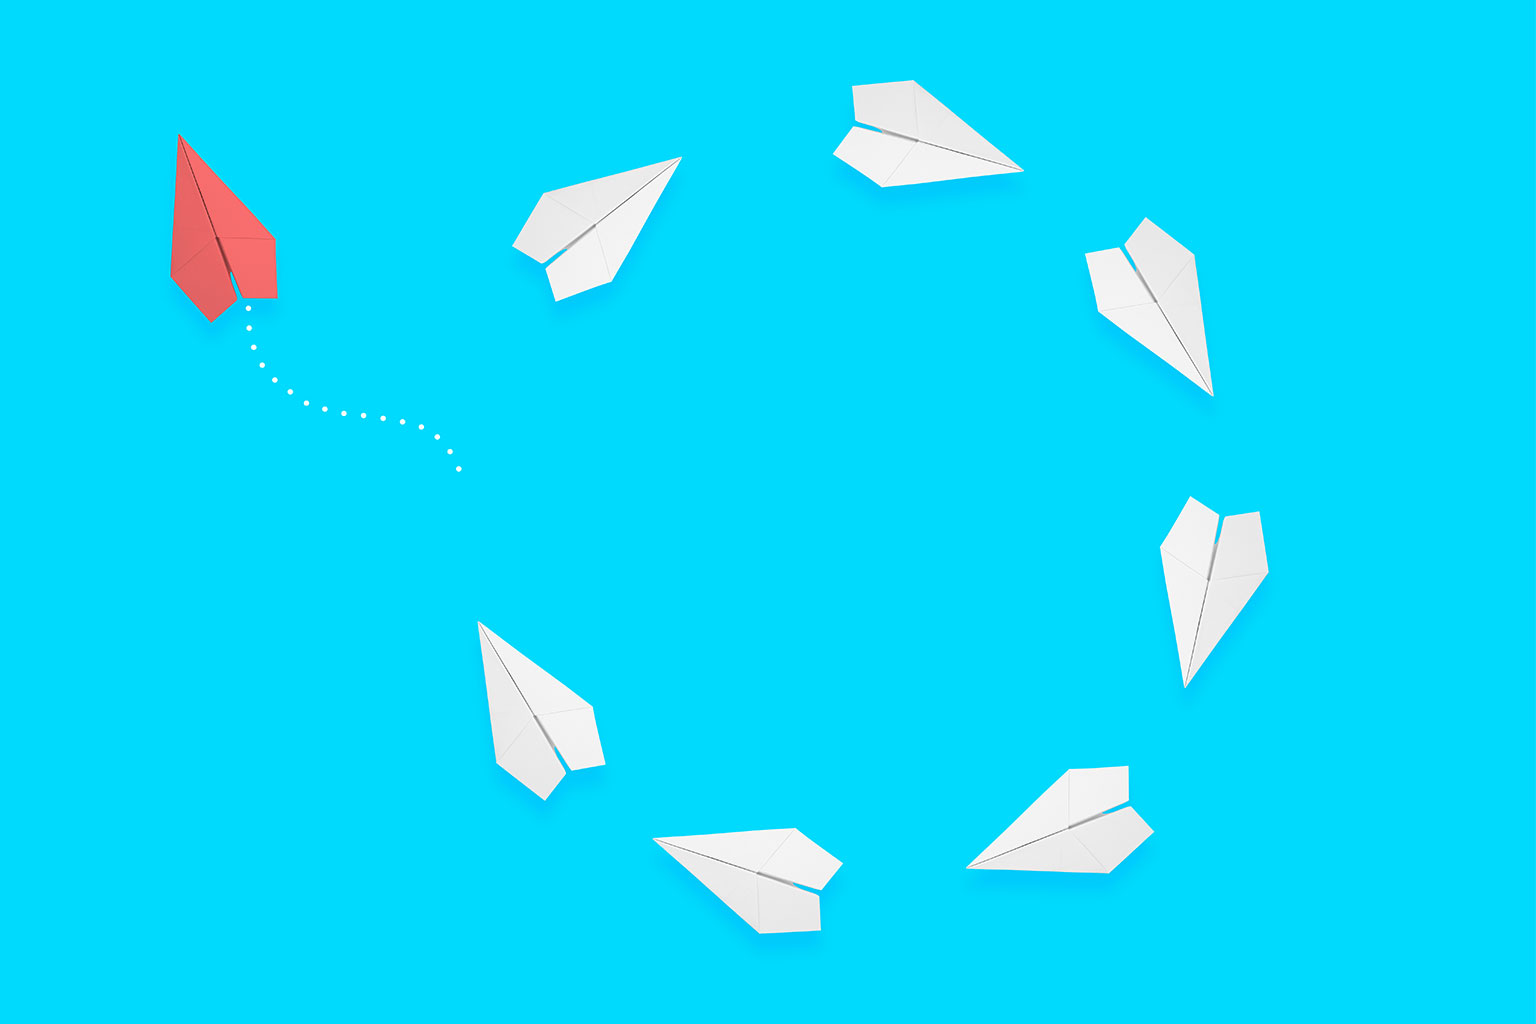 Seven white paper airplanes form a circle, but a single red paper airplane chooses its own path, flying up and to the left. © By Memed ÖZASLAN/stock.adobe.com